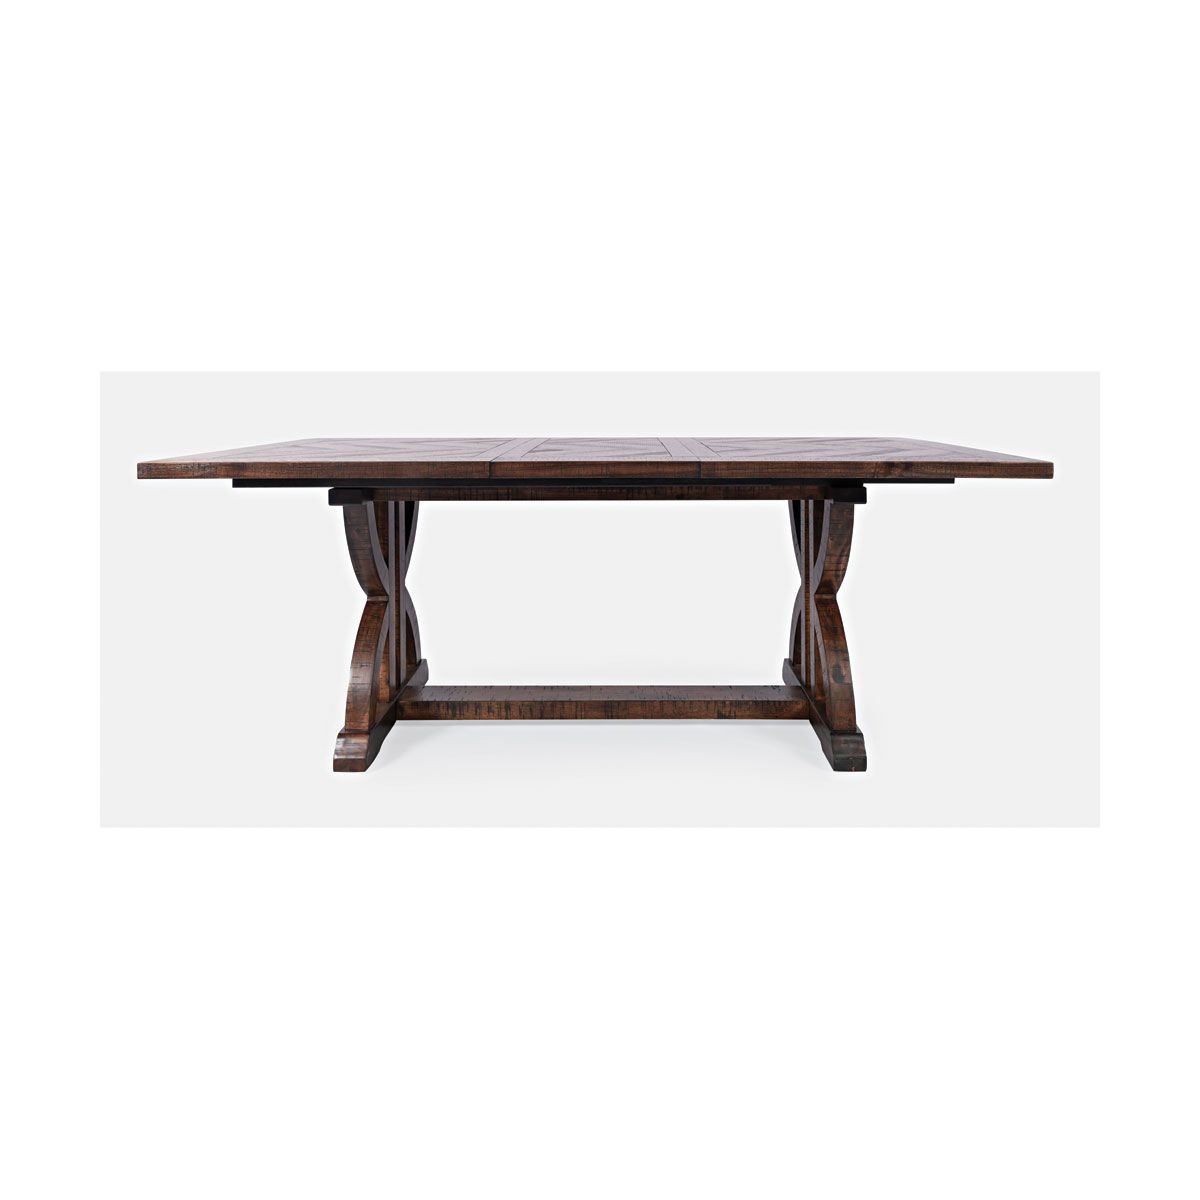 FENWAY DINING TABLE | Badcock Home Furniture &more